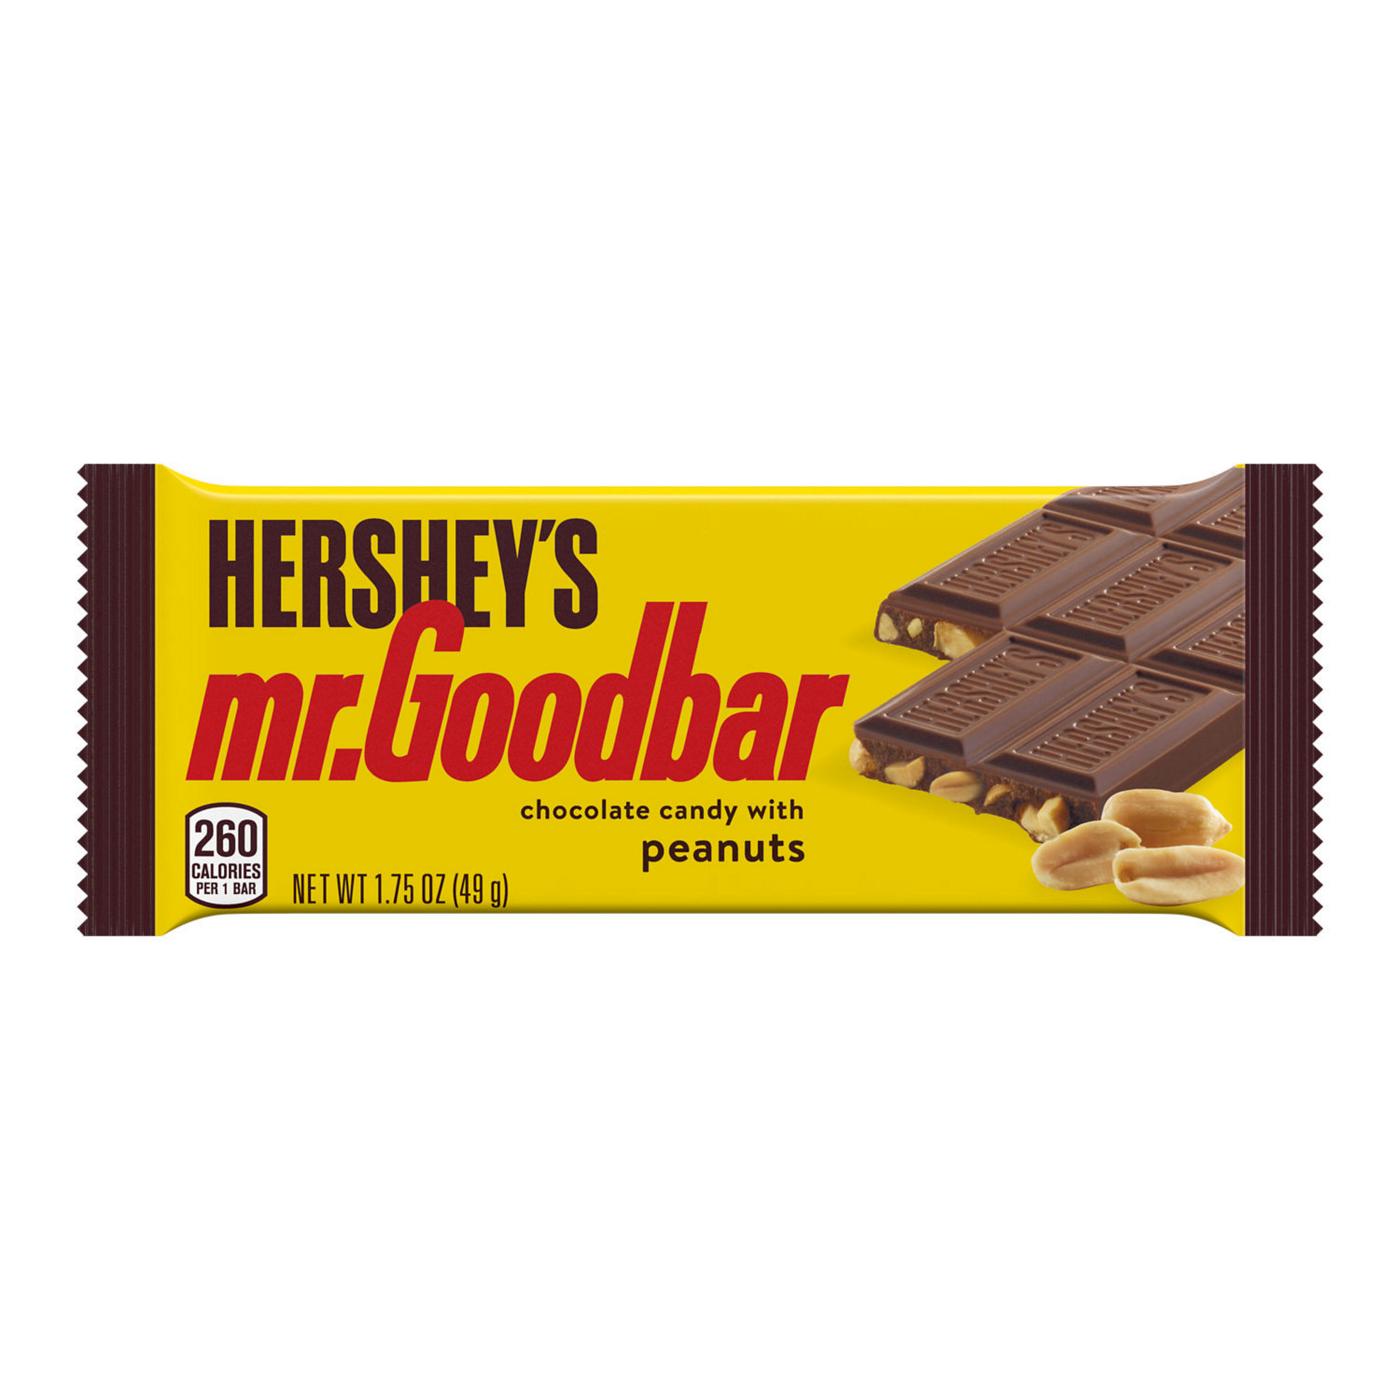 Hershey's Mr. Goodbar Chocolate with Peanuts Candy Bar; image 1 of 7